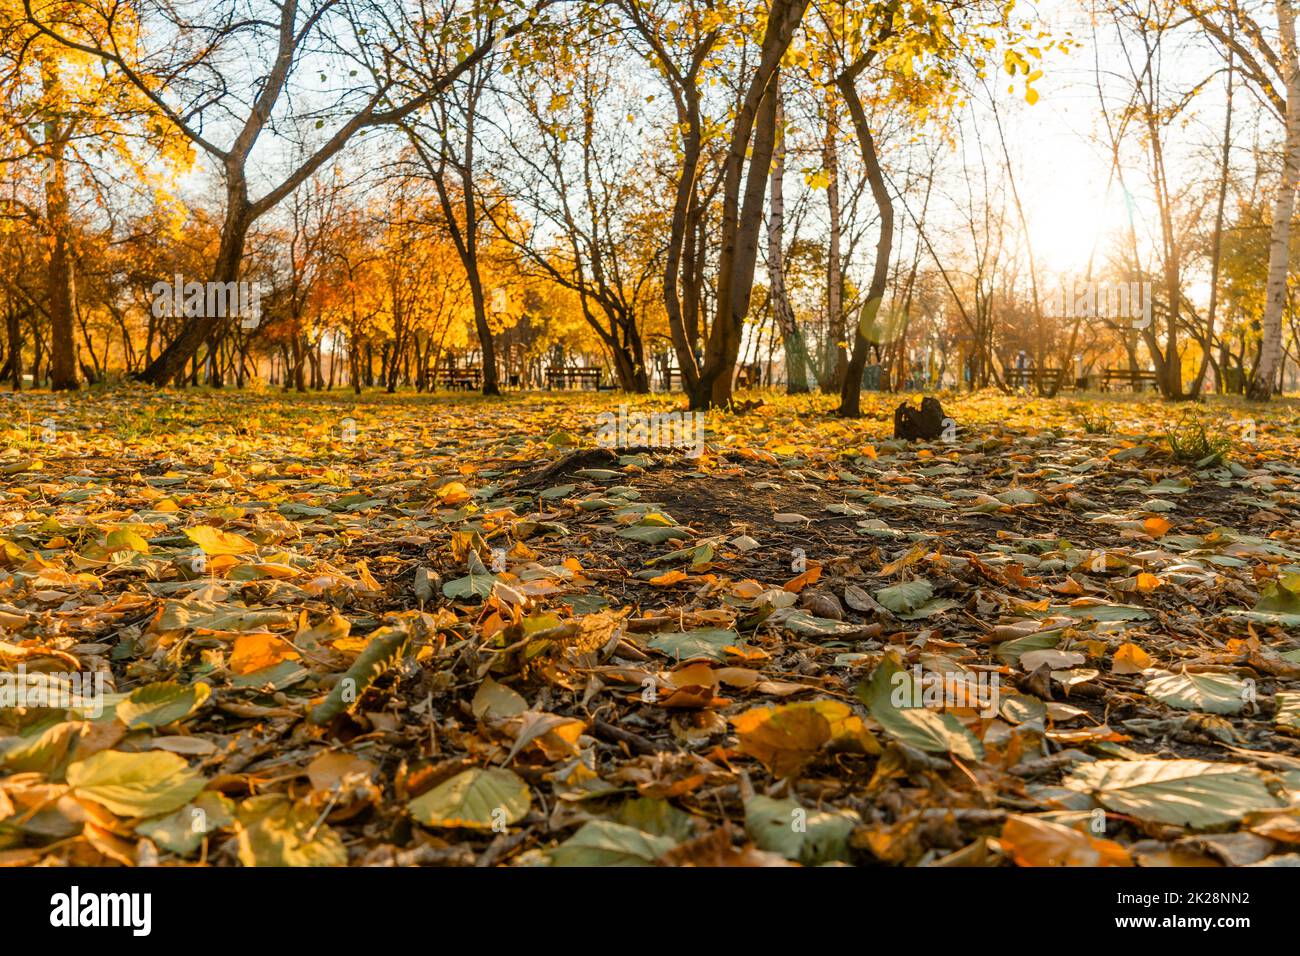 A walk in the park or on the square in October through the autumn golden foliage of trees with the rays of the sun. A walk through the autumn leaves in the forest or in the meadow. The golden foliage. Stock Photo